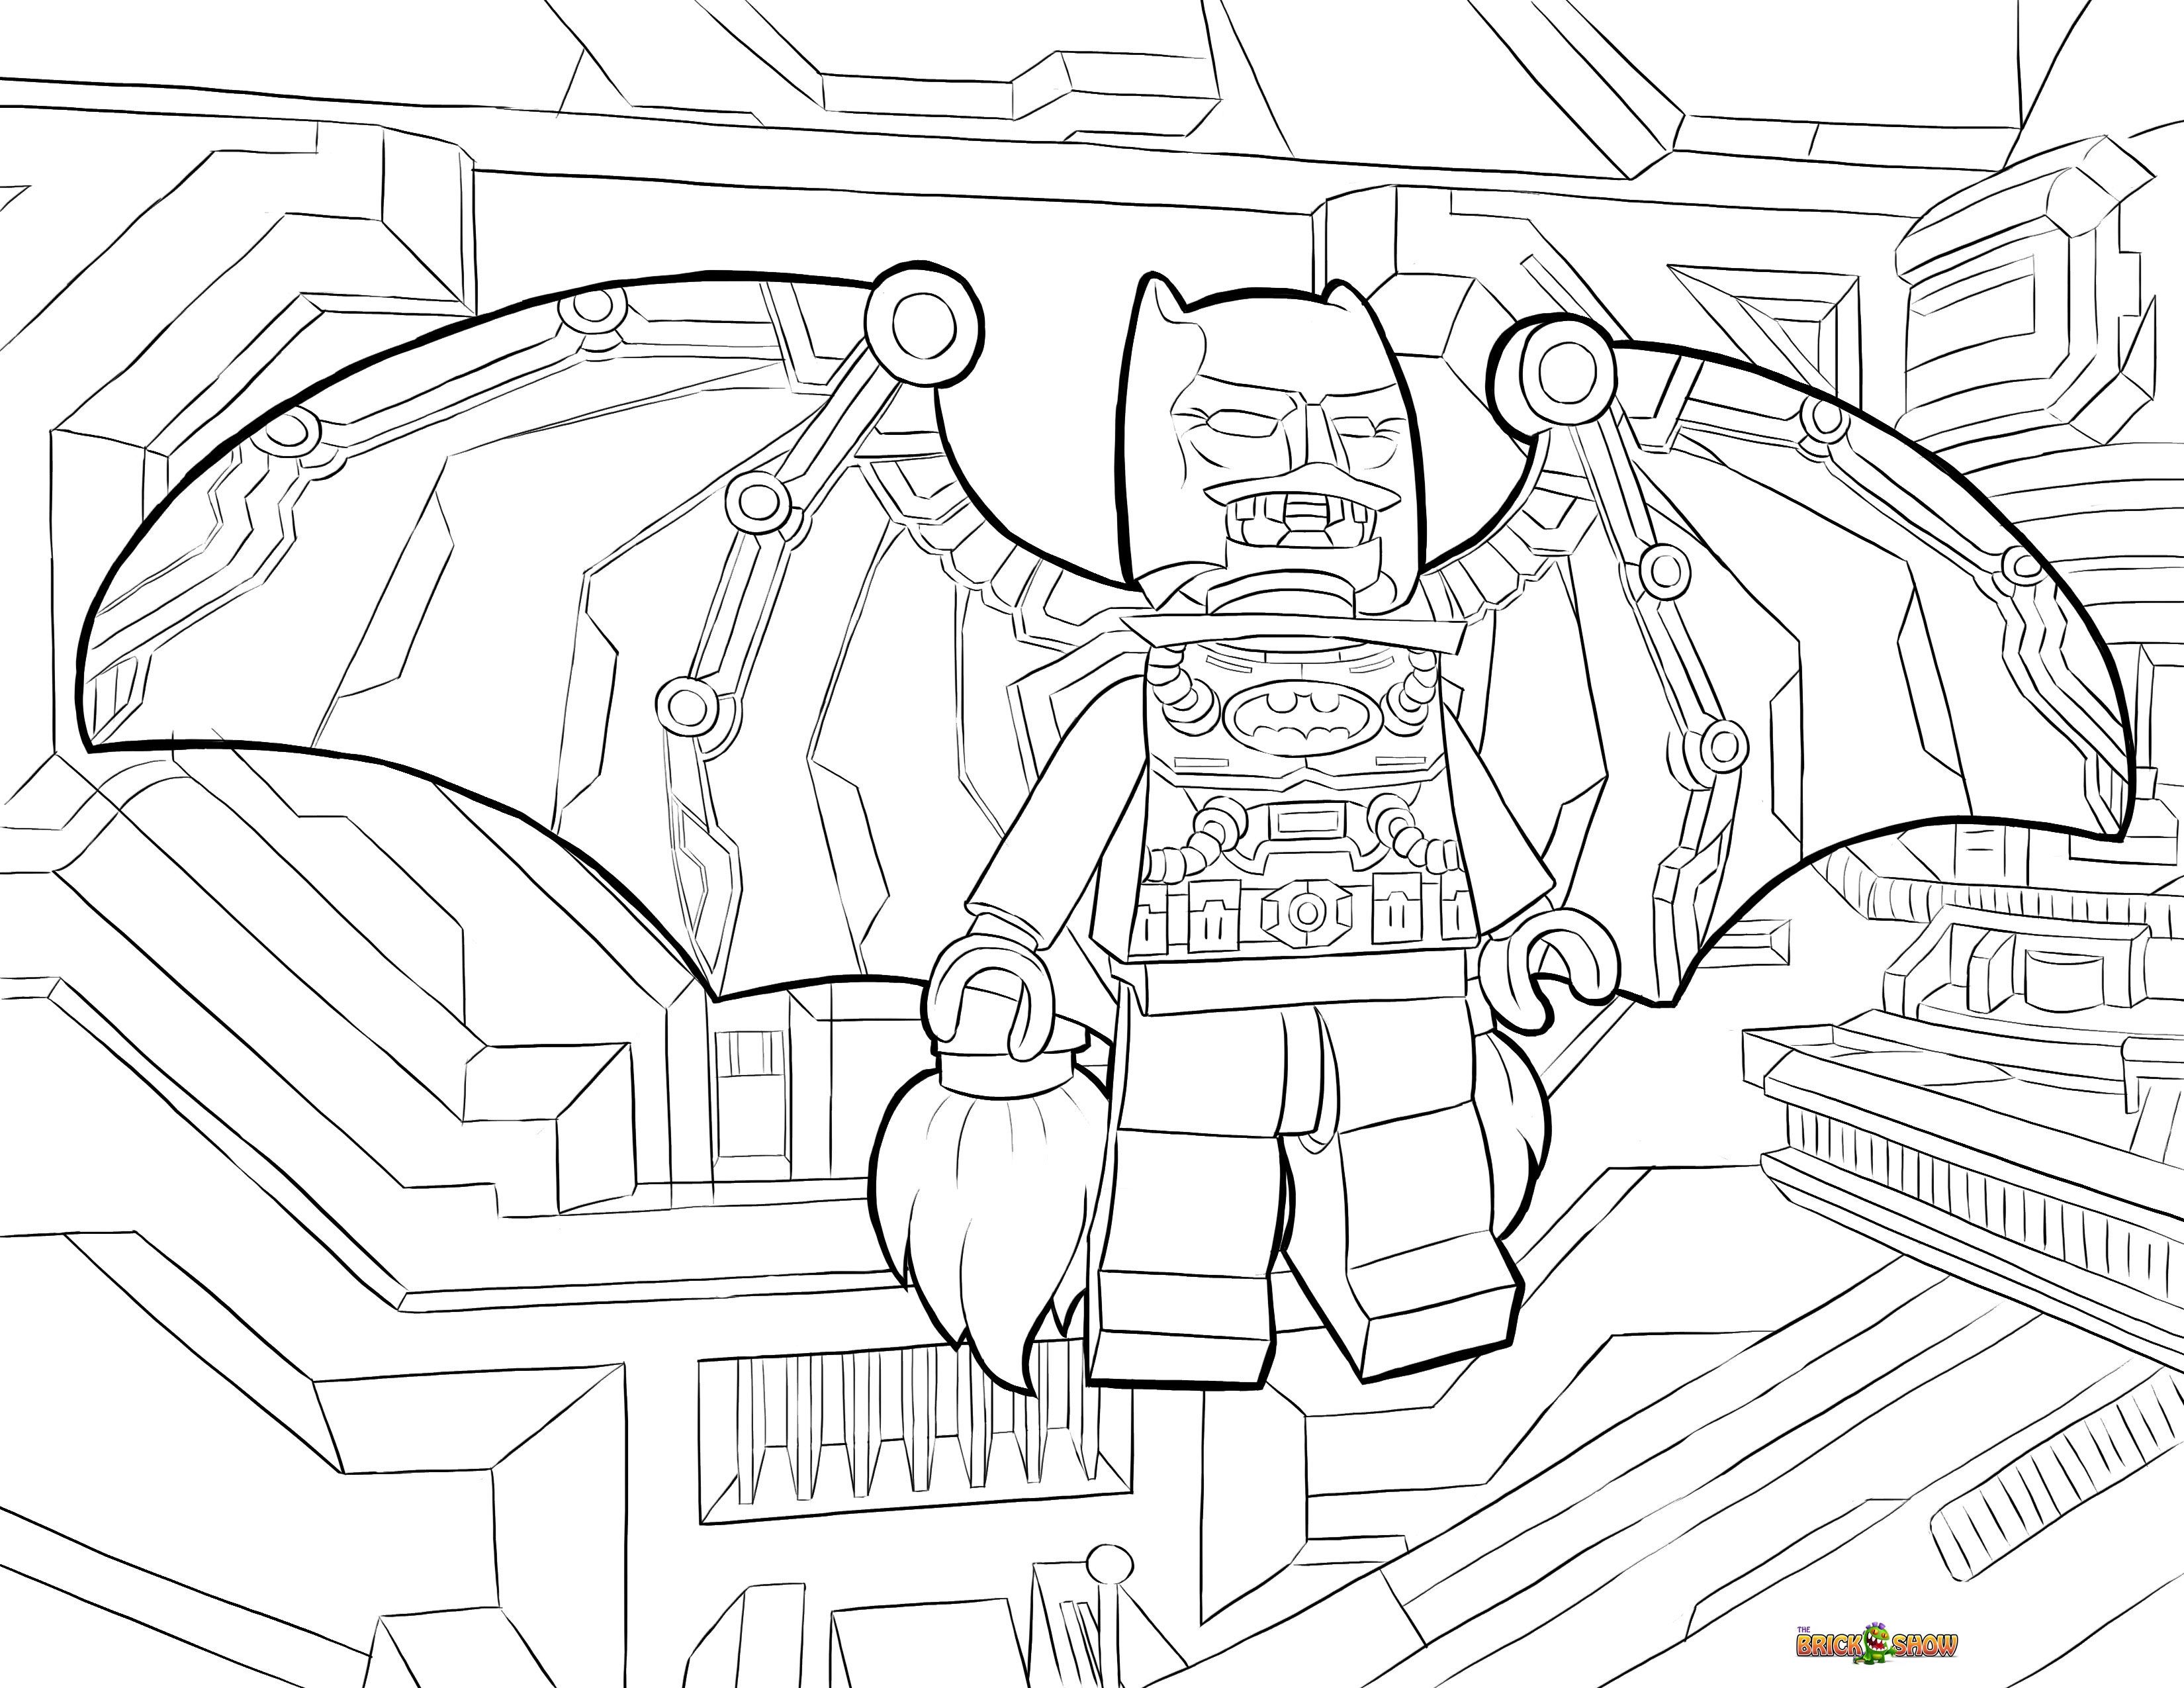 Coloring Pages Of Lego Batman - Coloring Page Photos